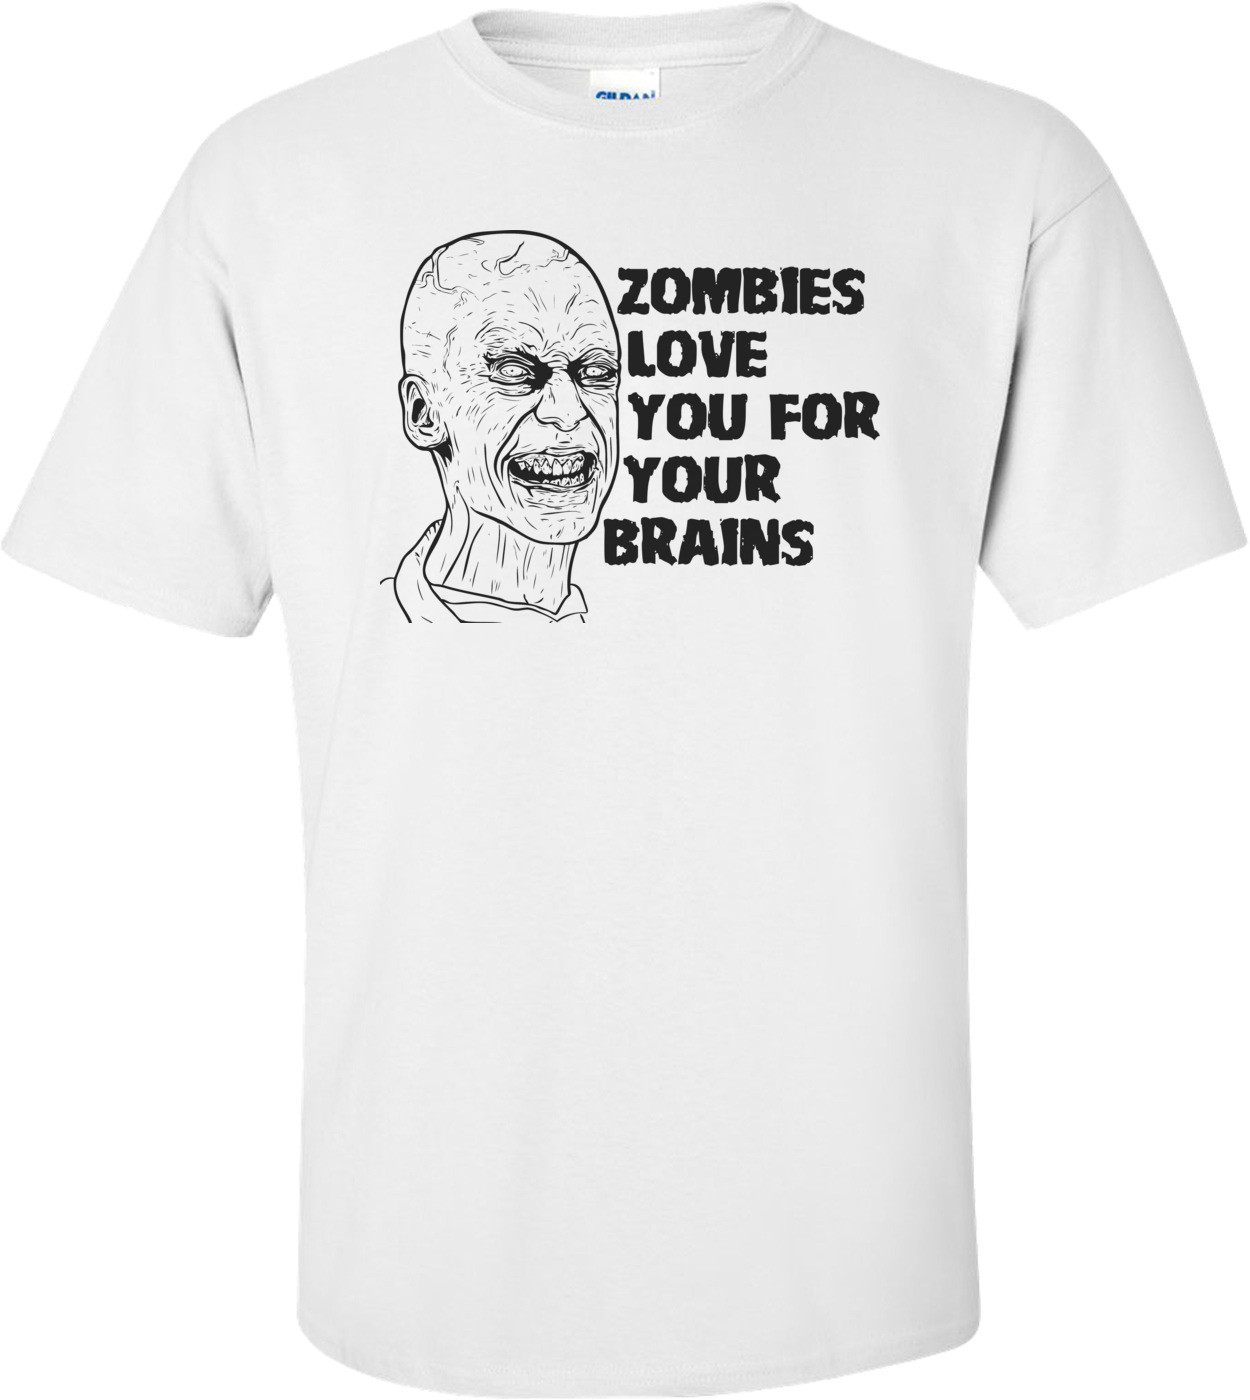 Zombies Love You For Your Brains - Zombie Shirt